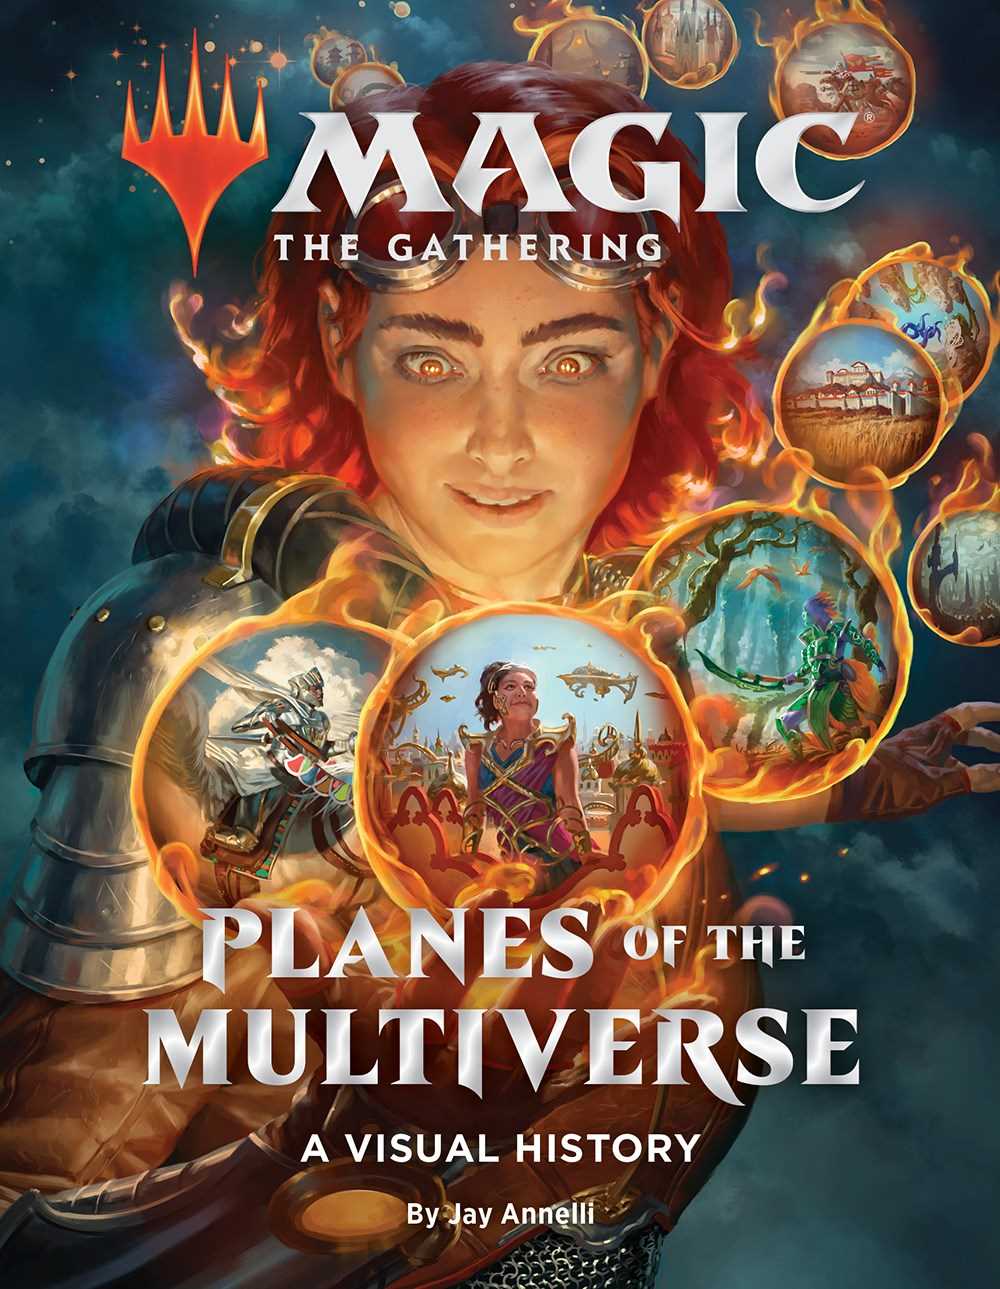 Magic: The Gathering: Planes of the Multiverse